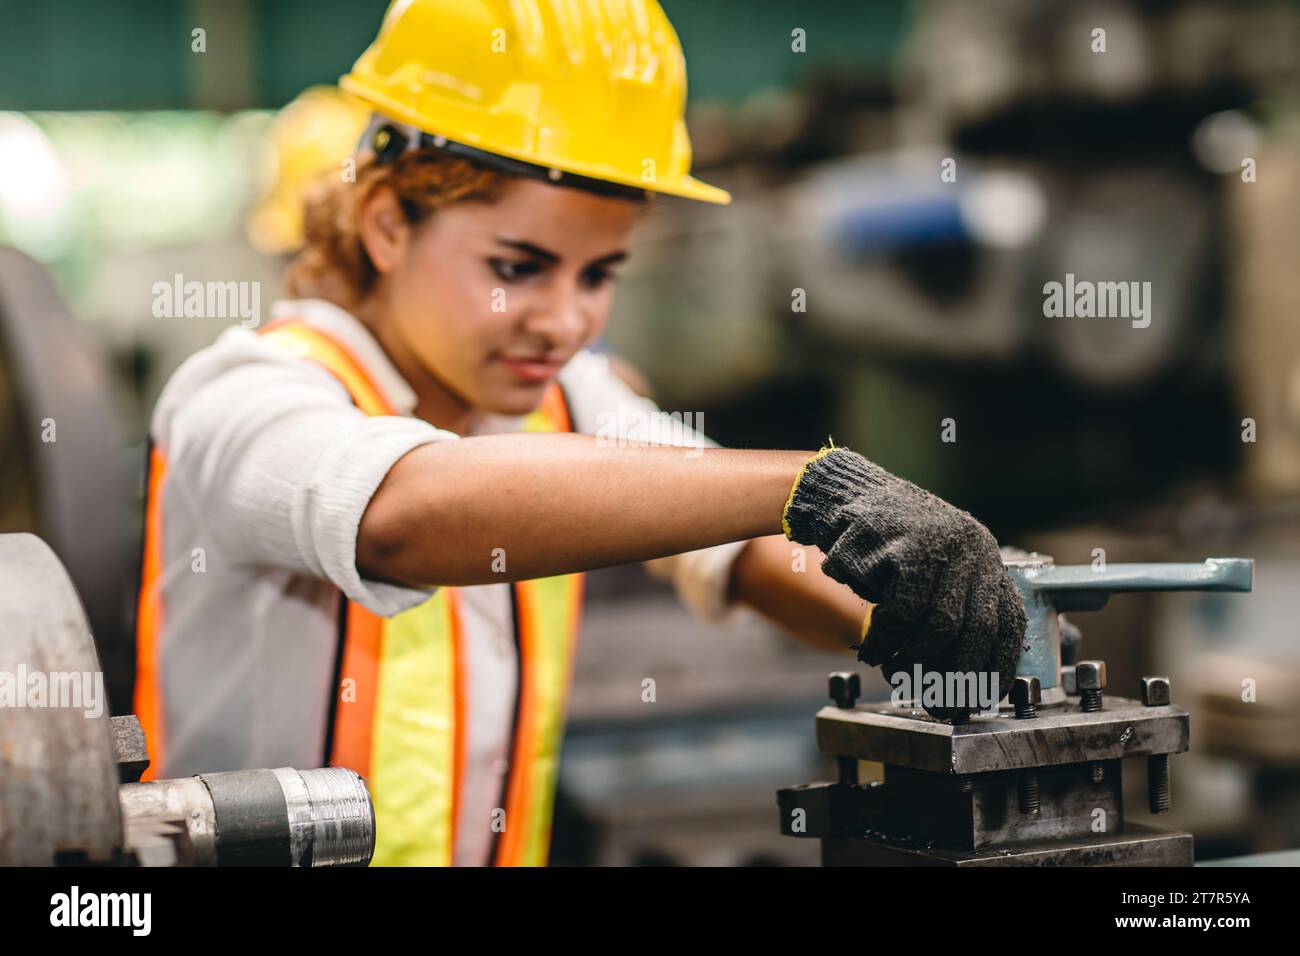 Engineer milling technician African woman worker manual hand skill working in heavy industry control metal lathe machine Stock Photo